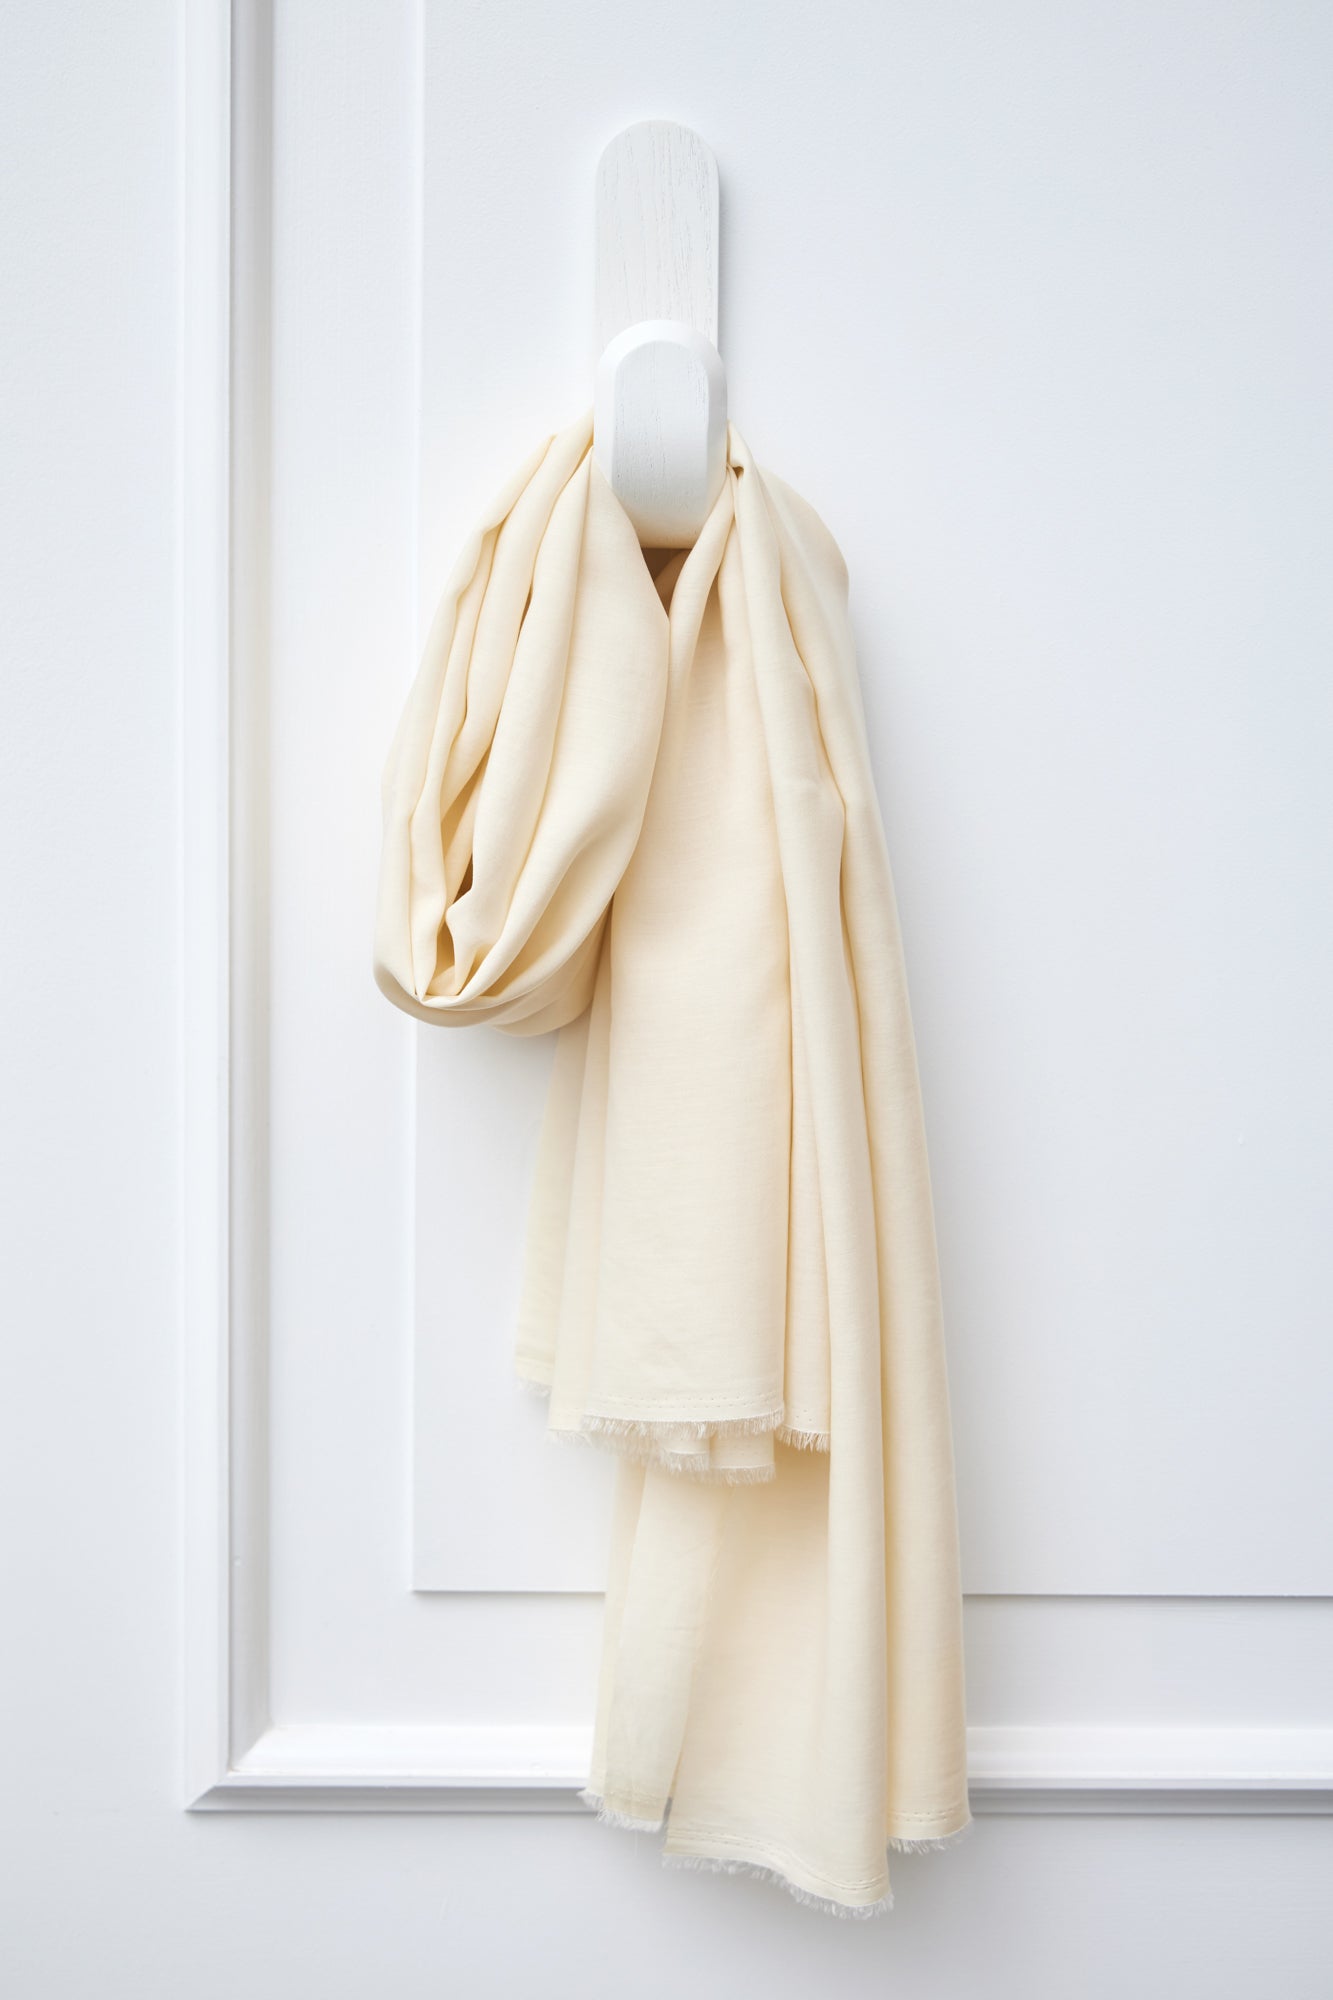 Piece of Vida voile tencel sewing fabric in colour shell (cream) hanging on white hook